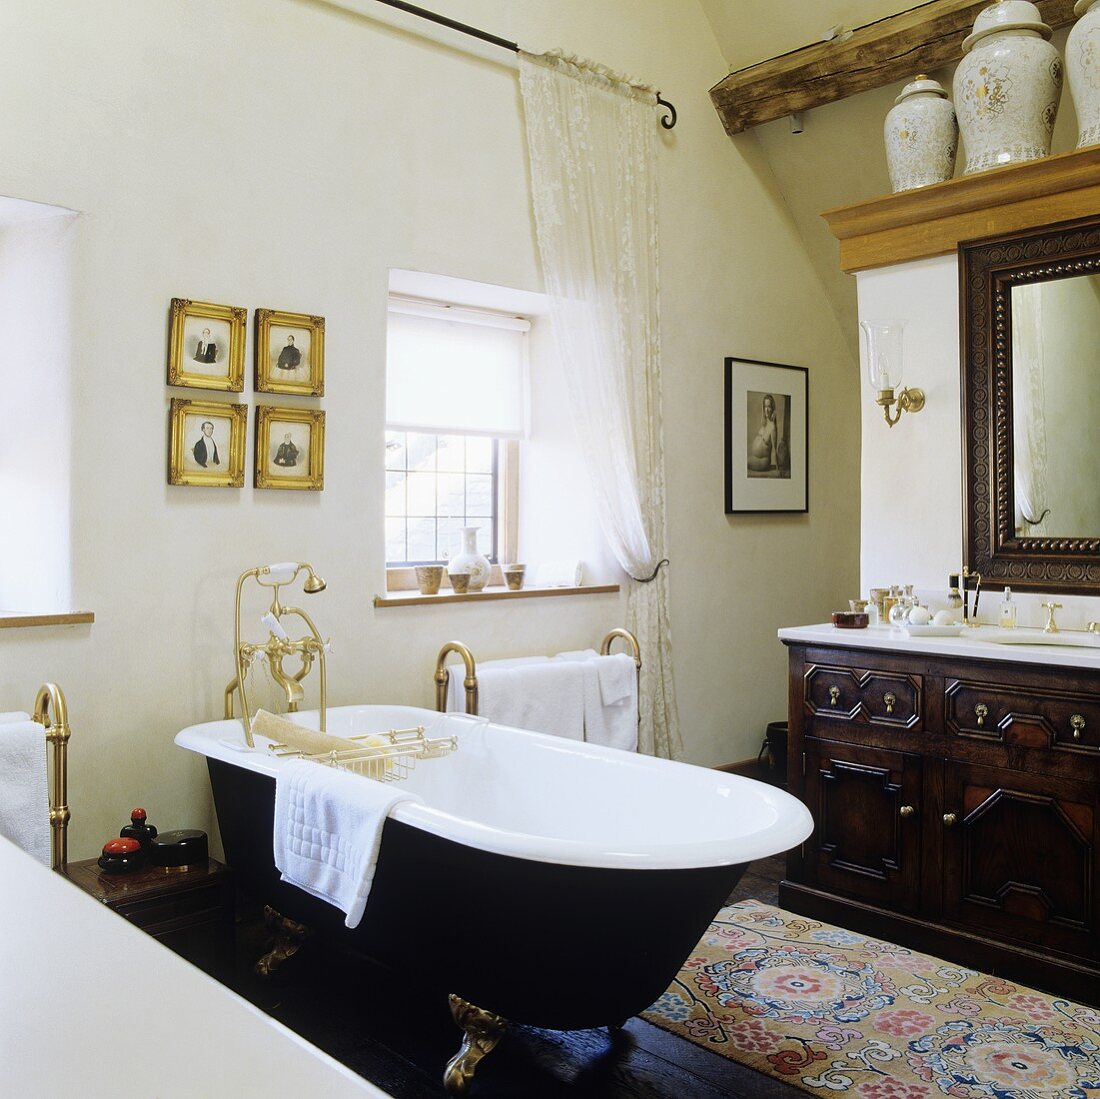 A bathroom in a country house with a freestanding bath tub with feet and brass taps